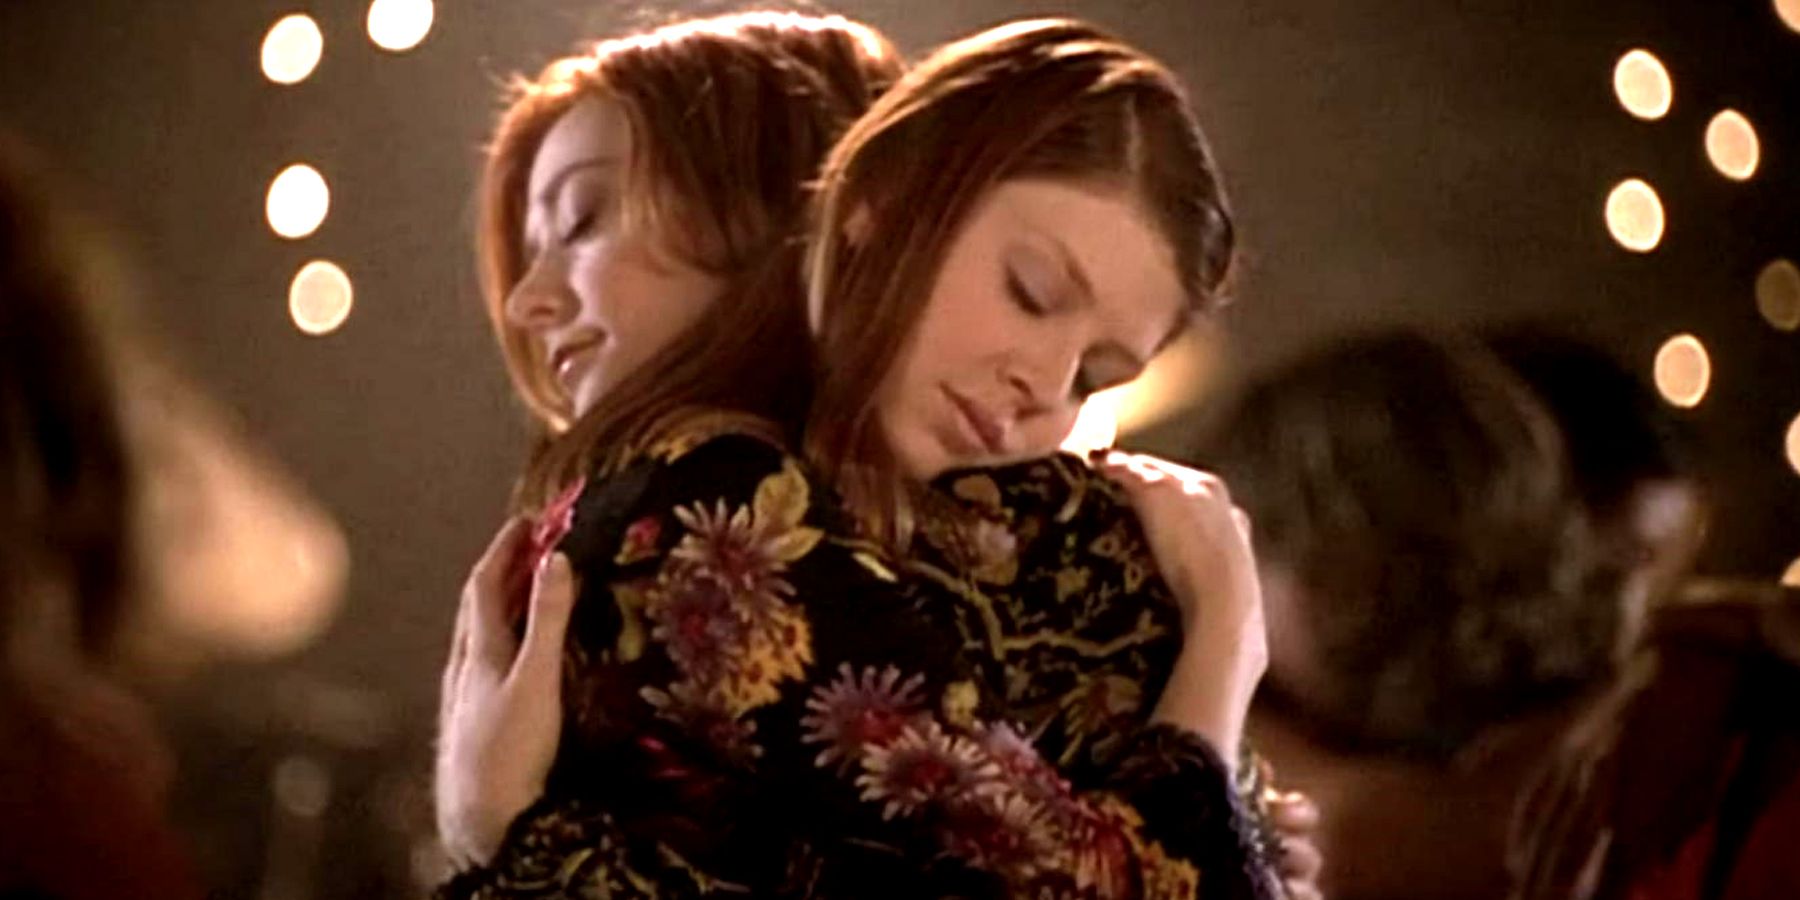 Willow and Tara have their eyes closed as they hug each other in Buffy the Vampire Slayer